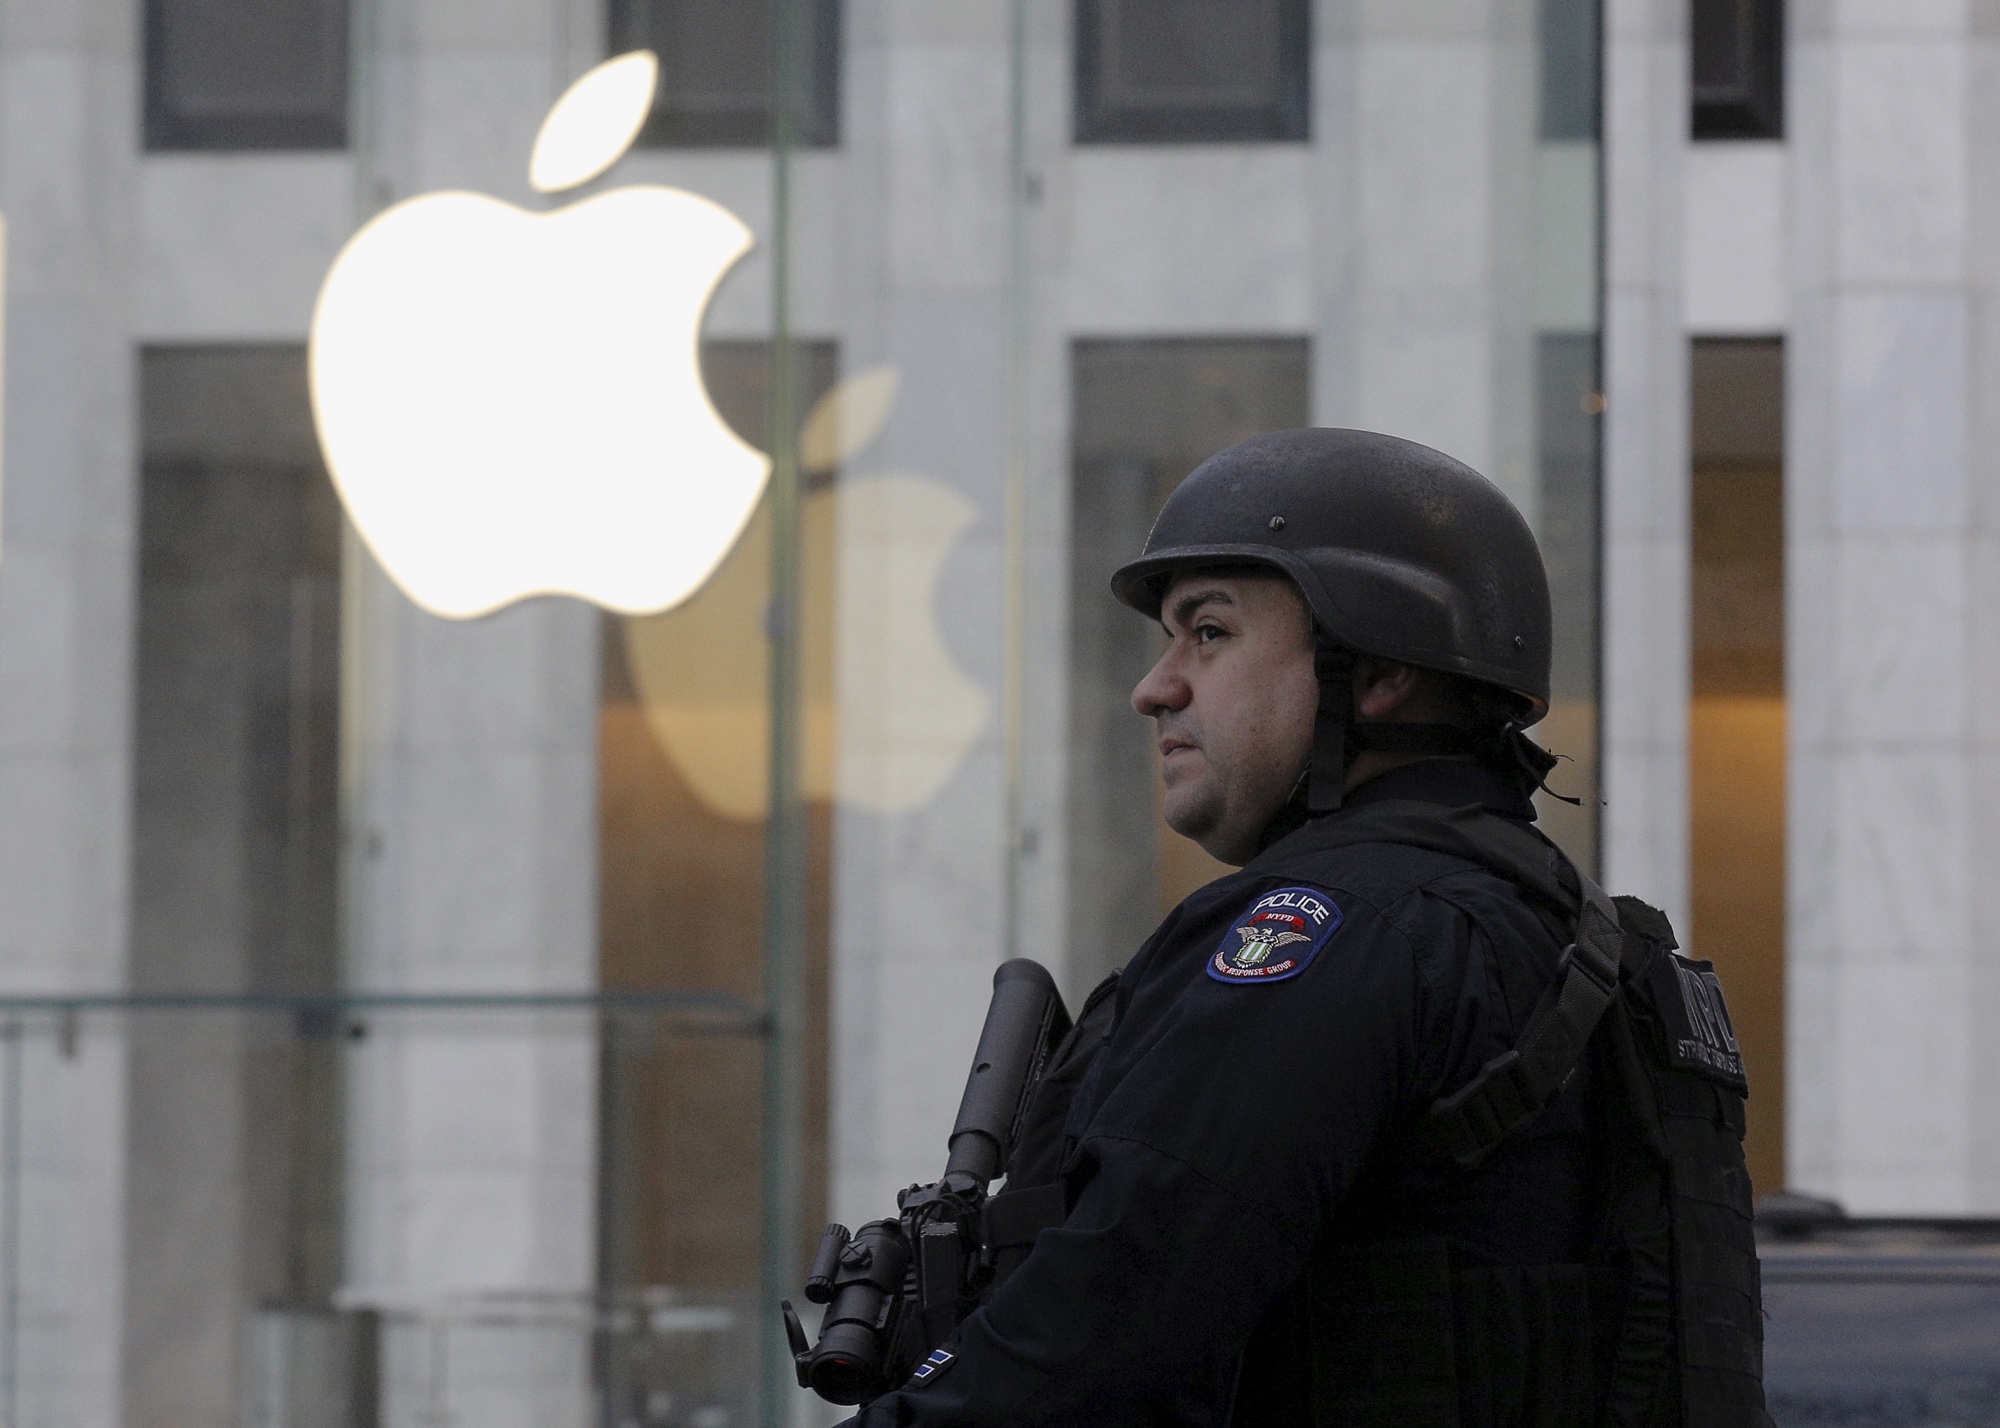 NYPD officer across the street from Apple's 5th Ave. store, NYC, March 11, 2016. REUTERS